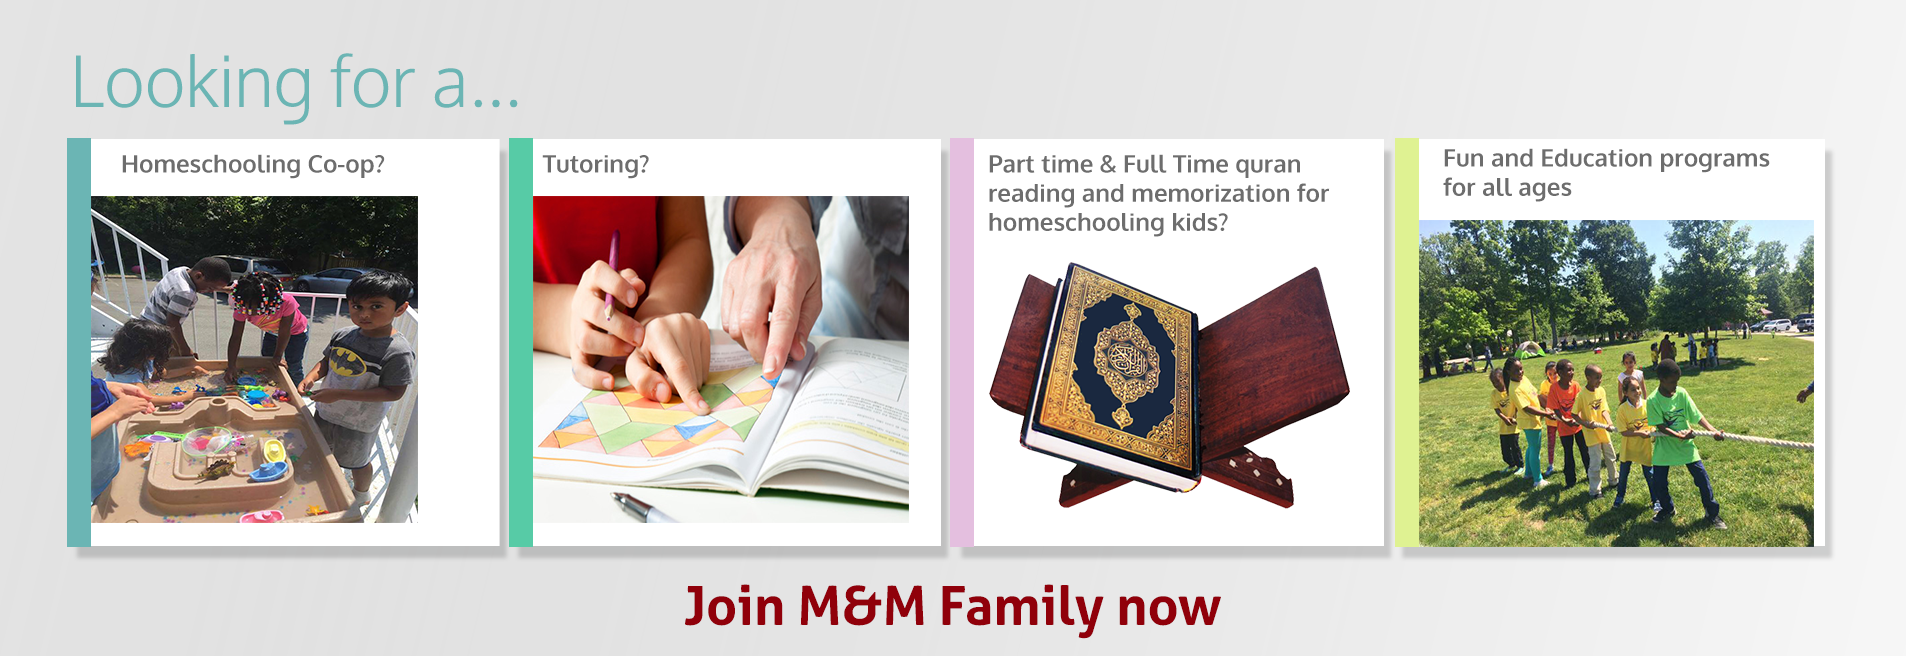 Join MM Family Now